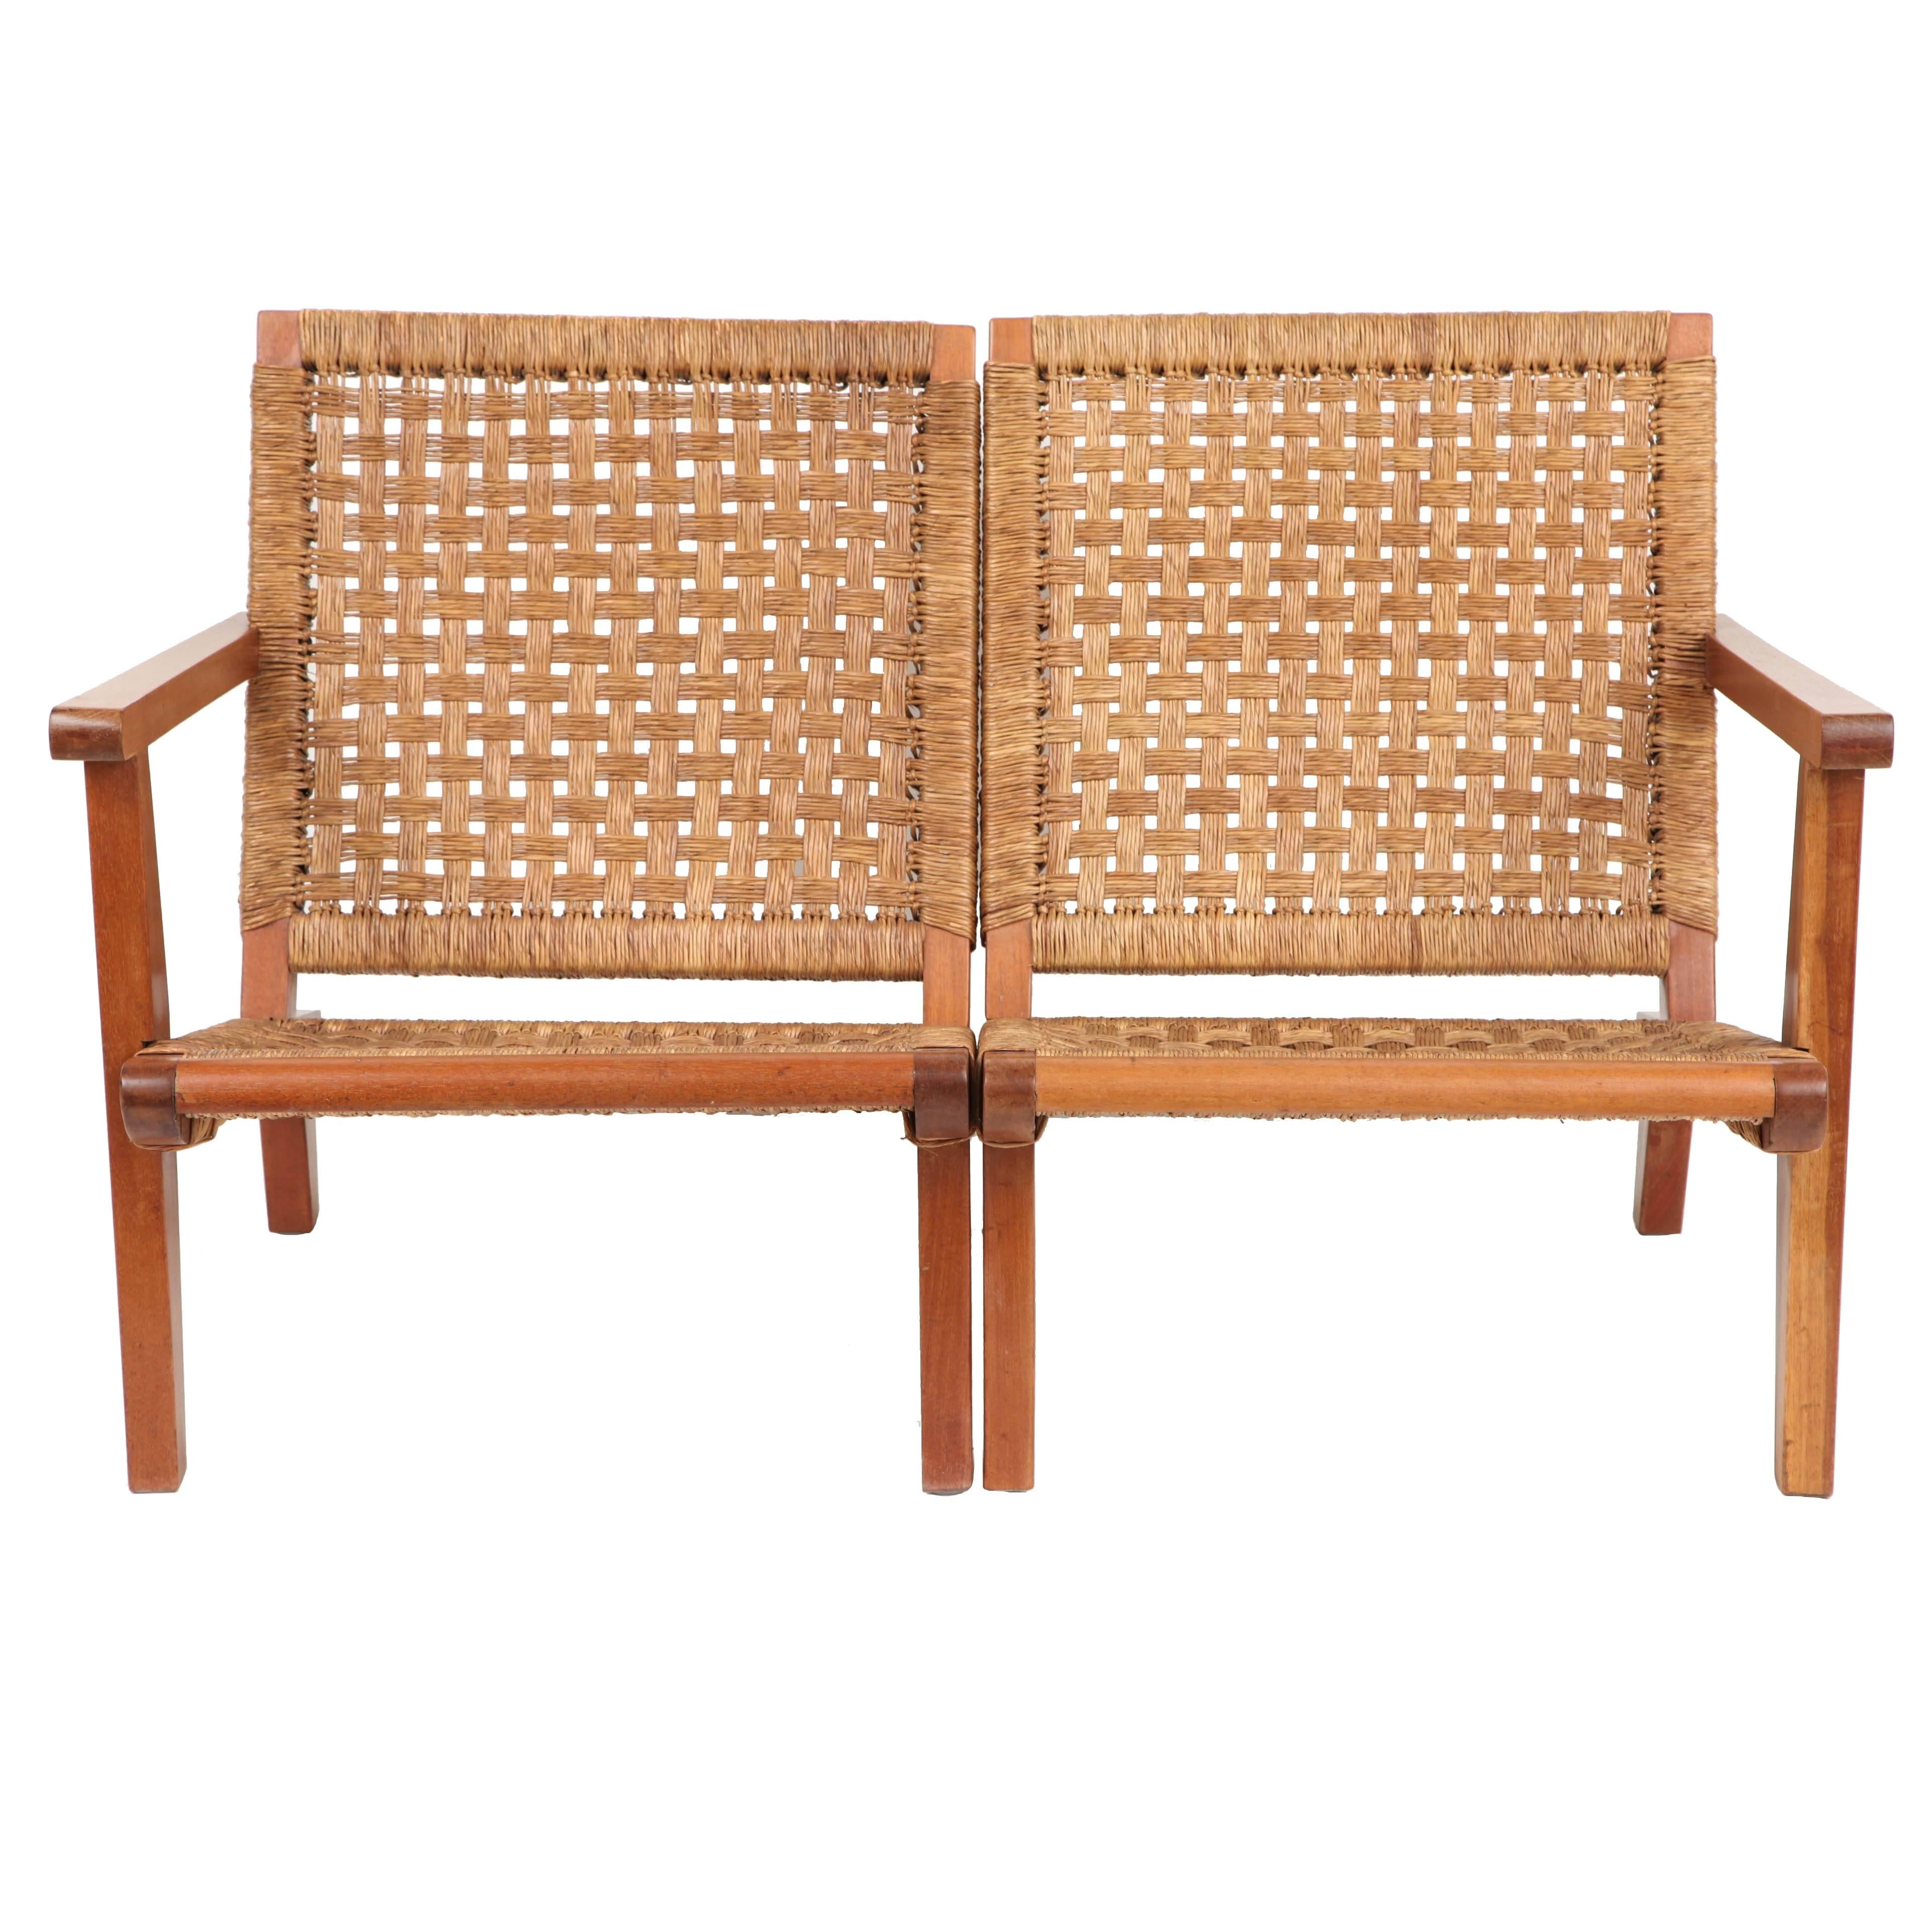 Clara Porset Walnut and Woven Rush Divided Settee For Sale